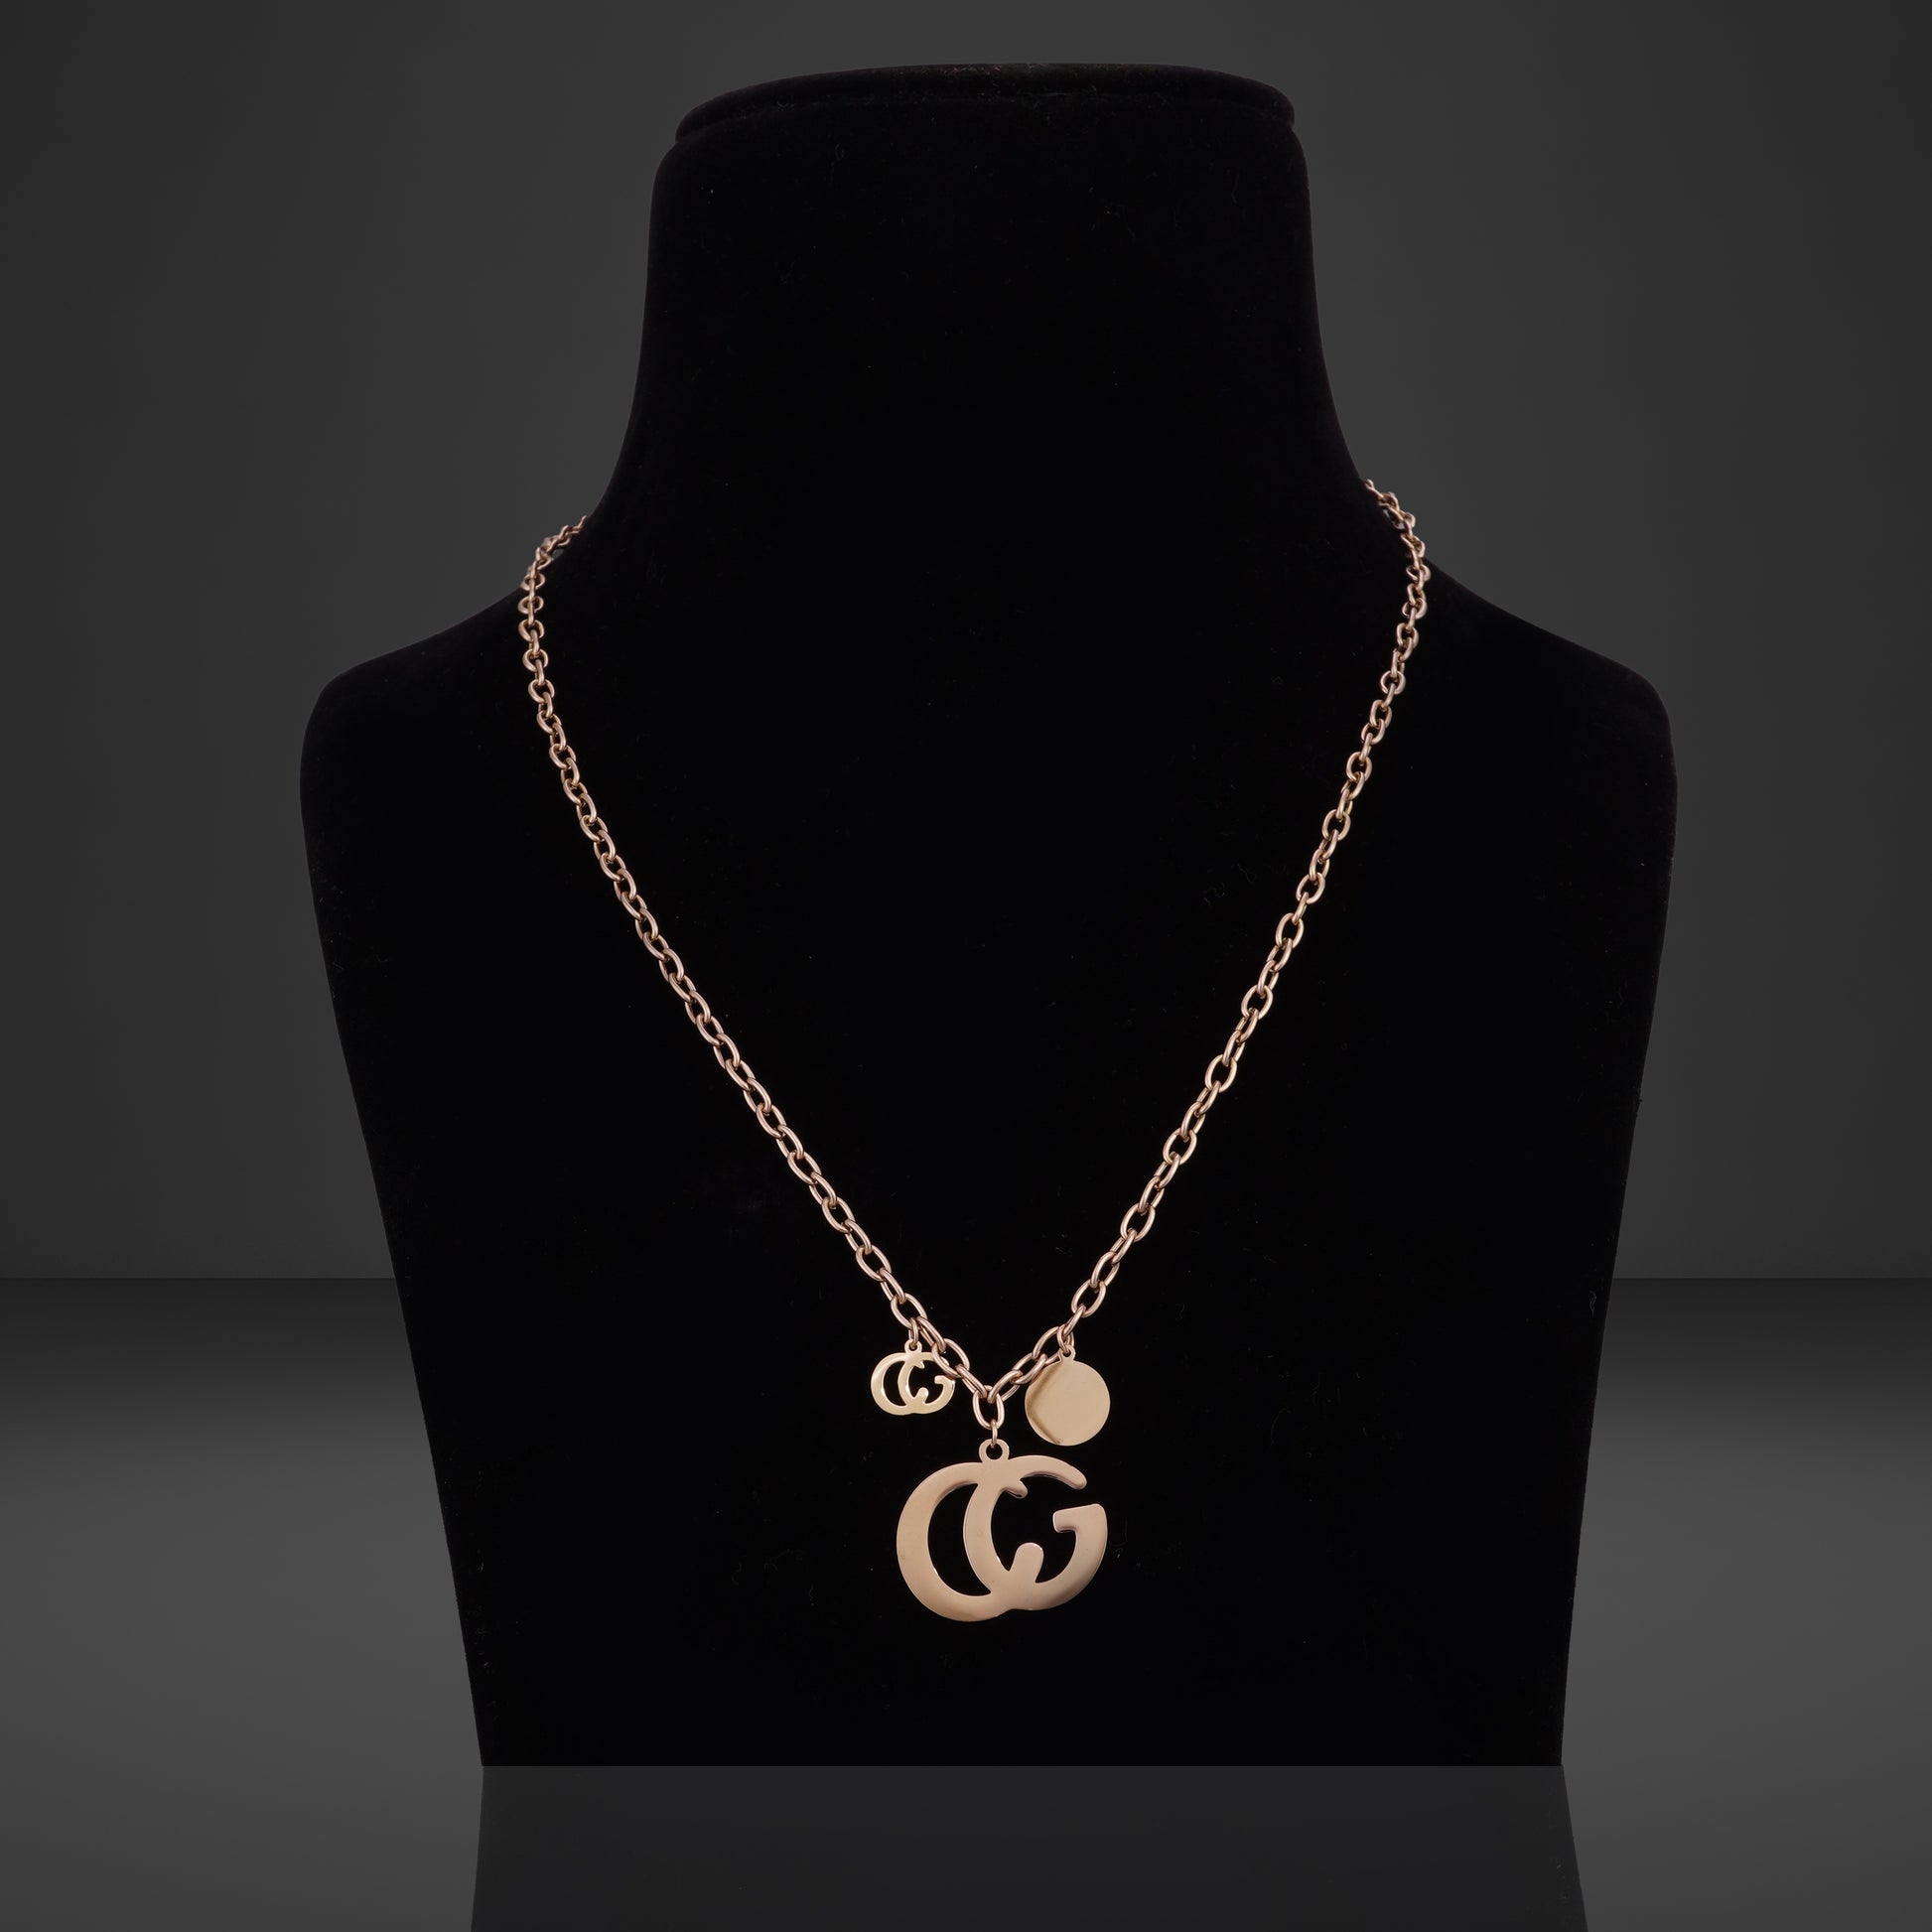 CG Rosegold Necklace